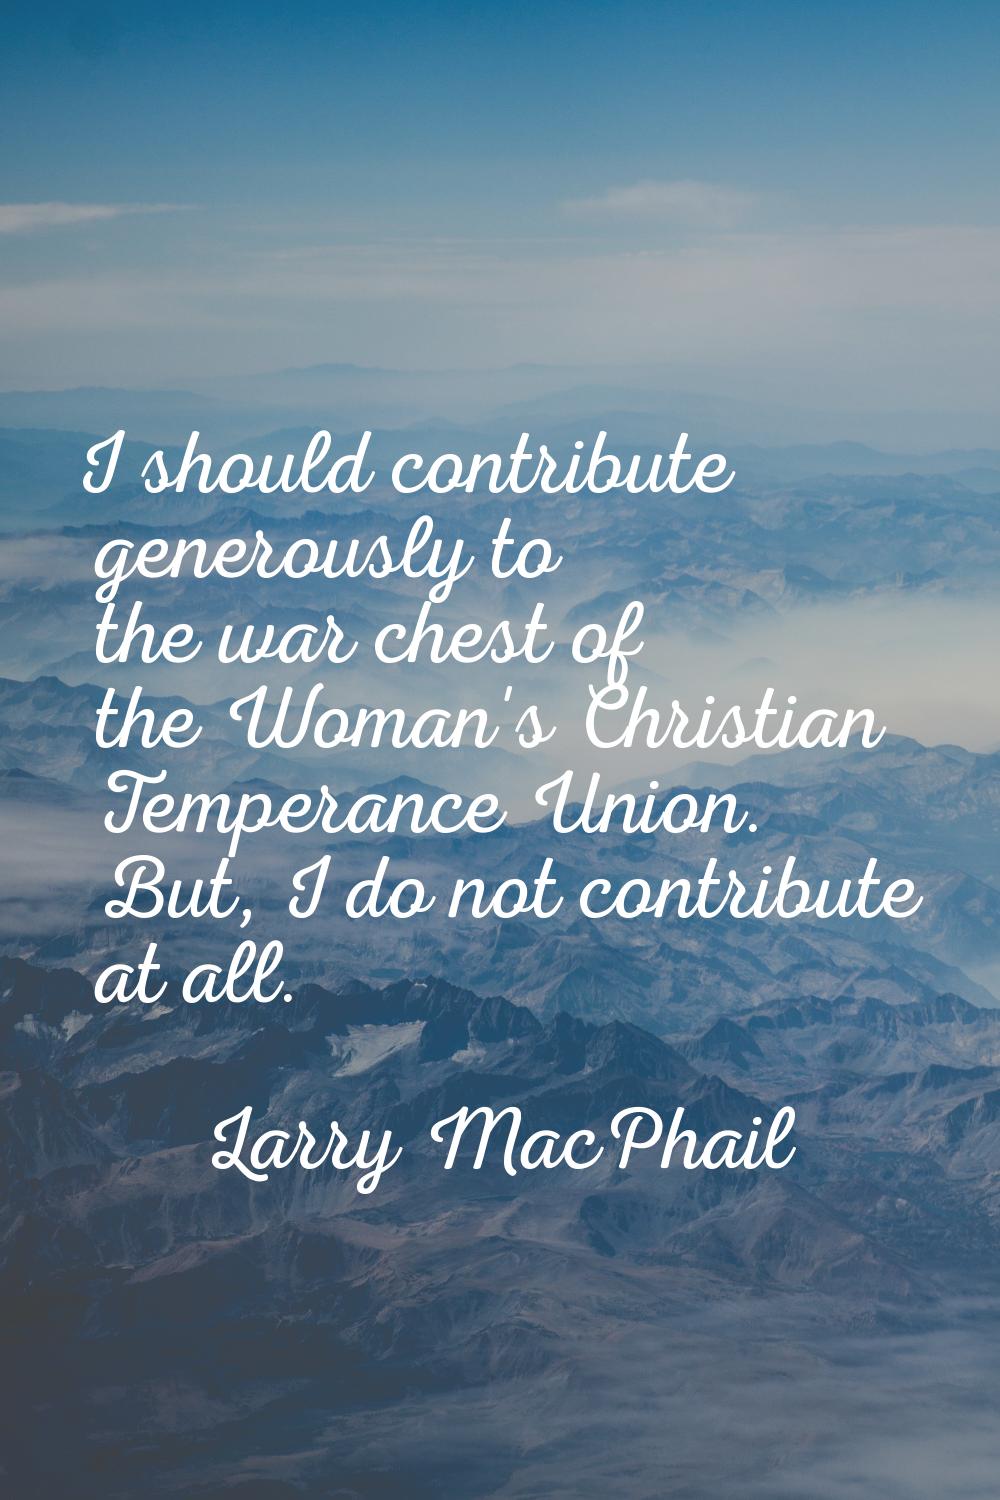 I should contribute generously to the war chest of the Woman's Christian Temperance Union. But, I d